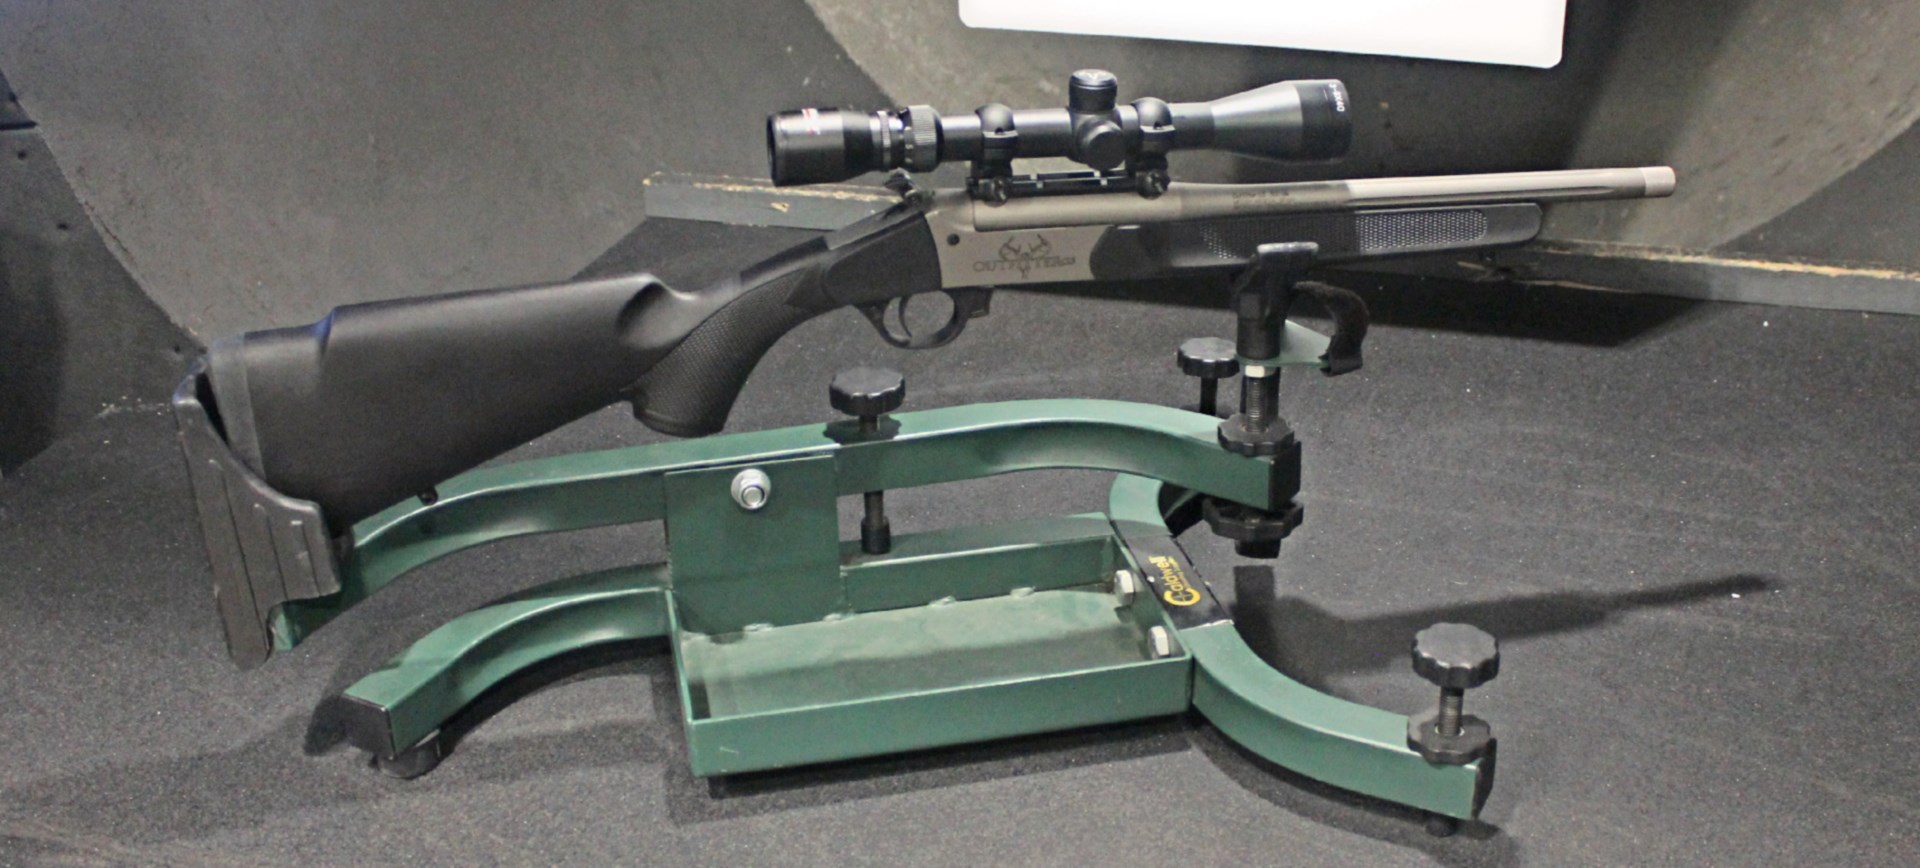 Traditions Outfitter G3 rifle in cradle on shooting range right-side view